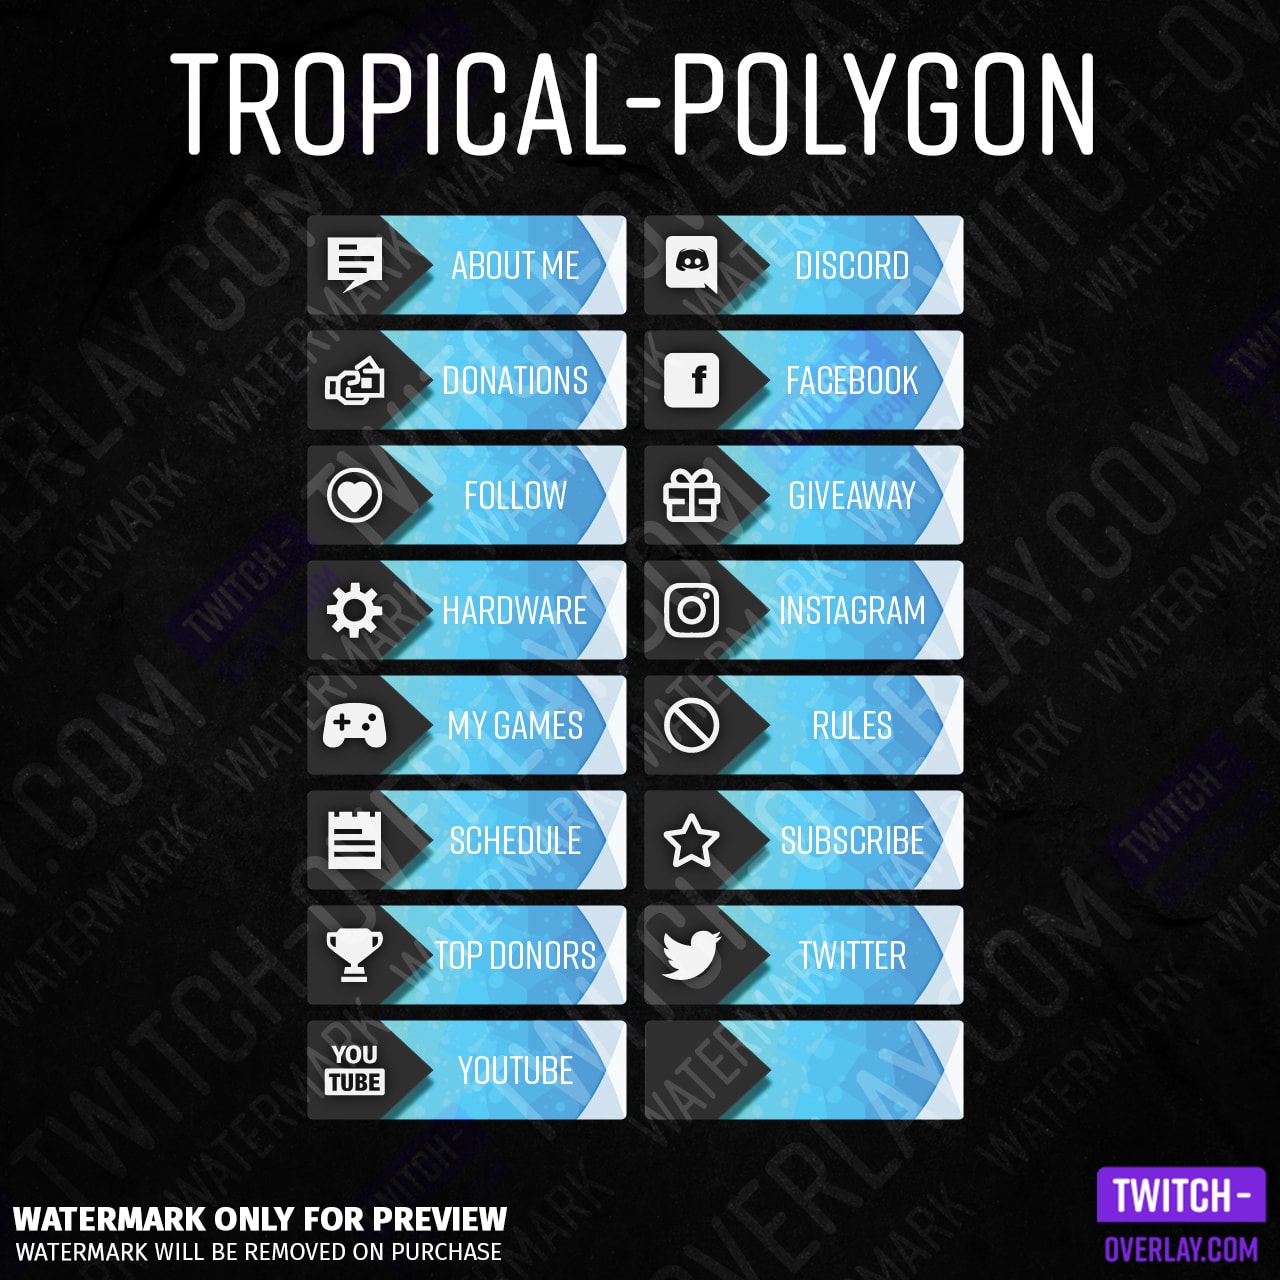 All Tropical-Polygon Twitch Panels in color Icy Blue